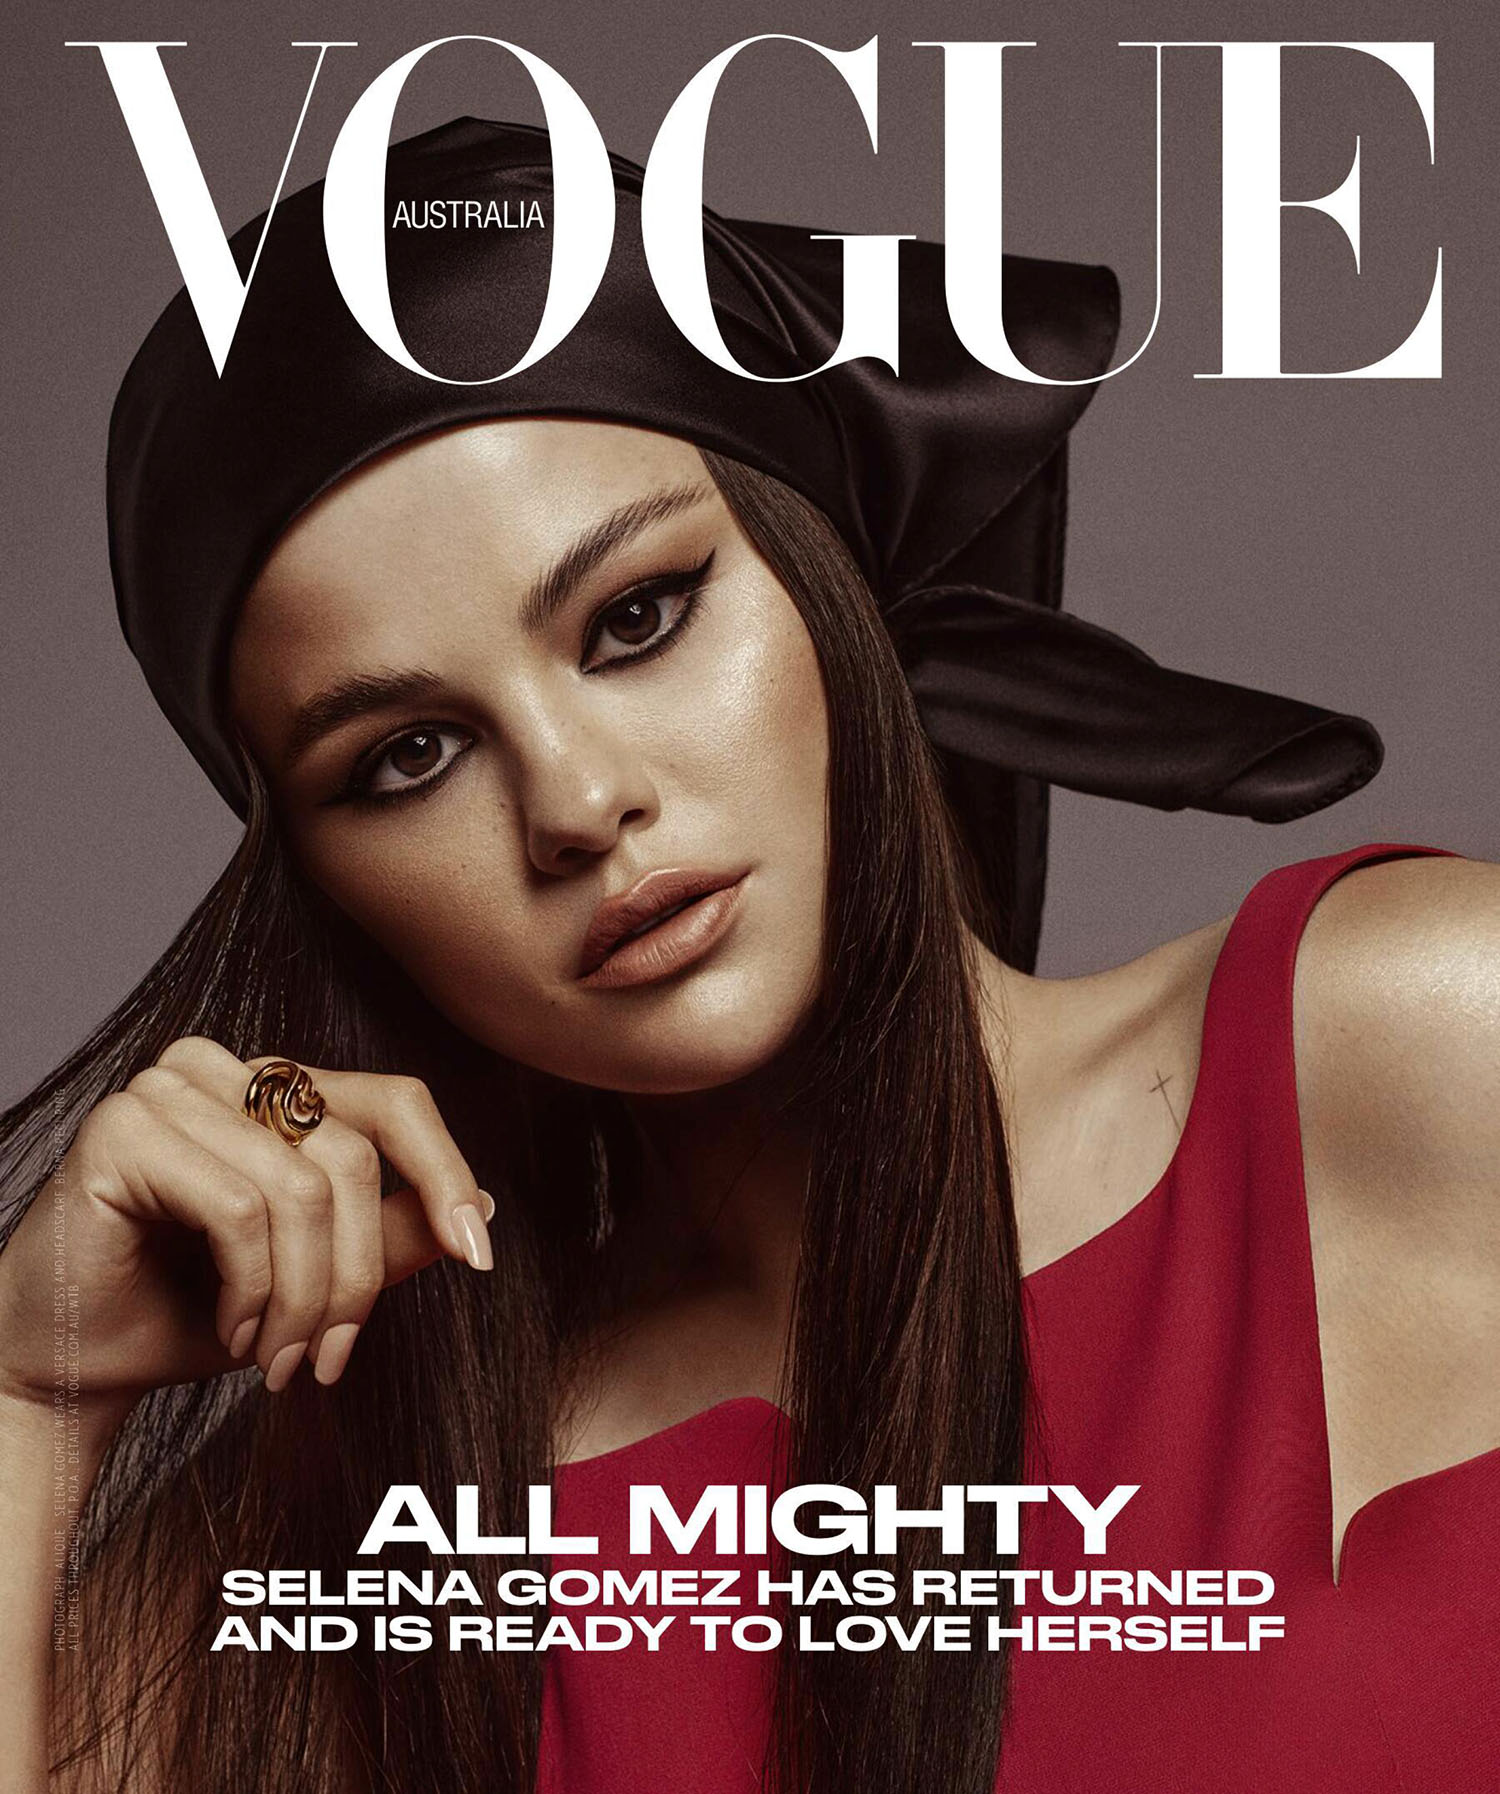 Selena Gomez Covers Vogue Australia July 2021 And Vogue Singapore Julyaugust 2021 By Alique